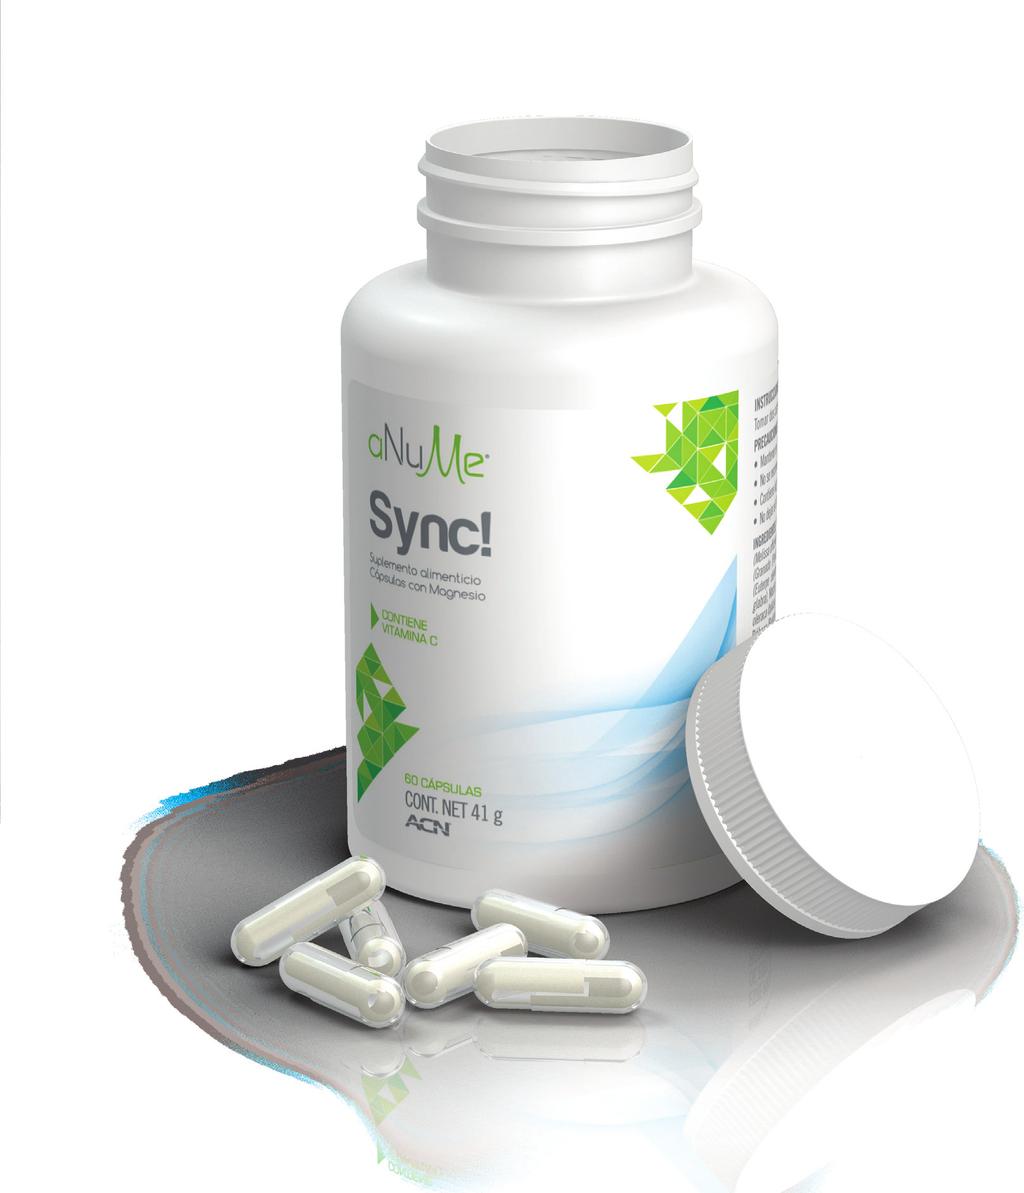 fiber which aids in managing hunger and provides a sense of fullness. Sync!